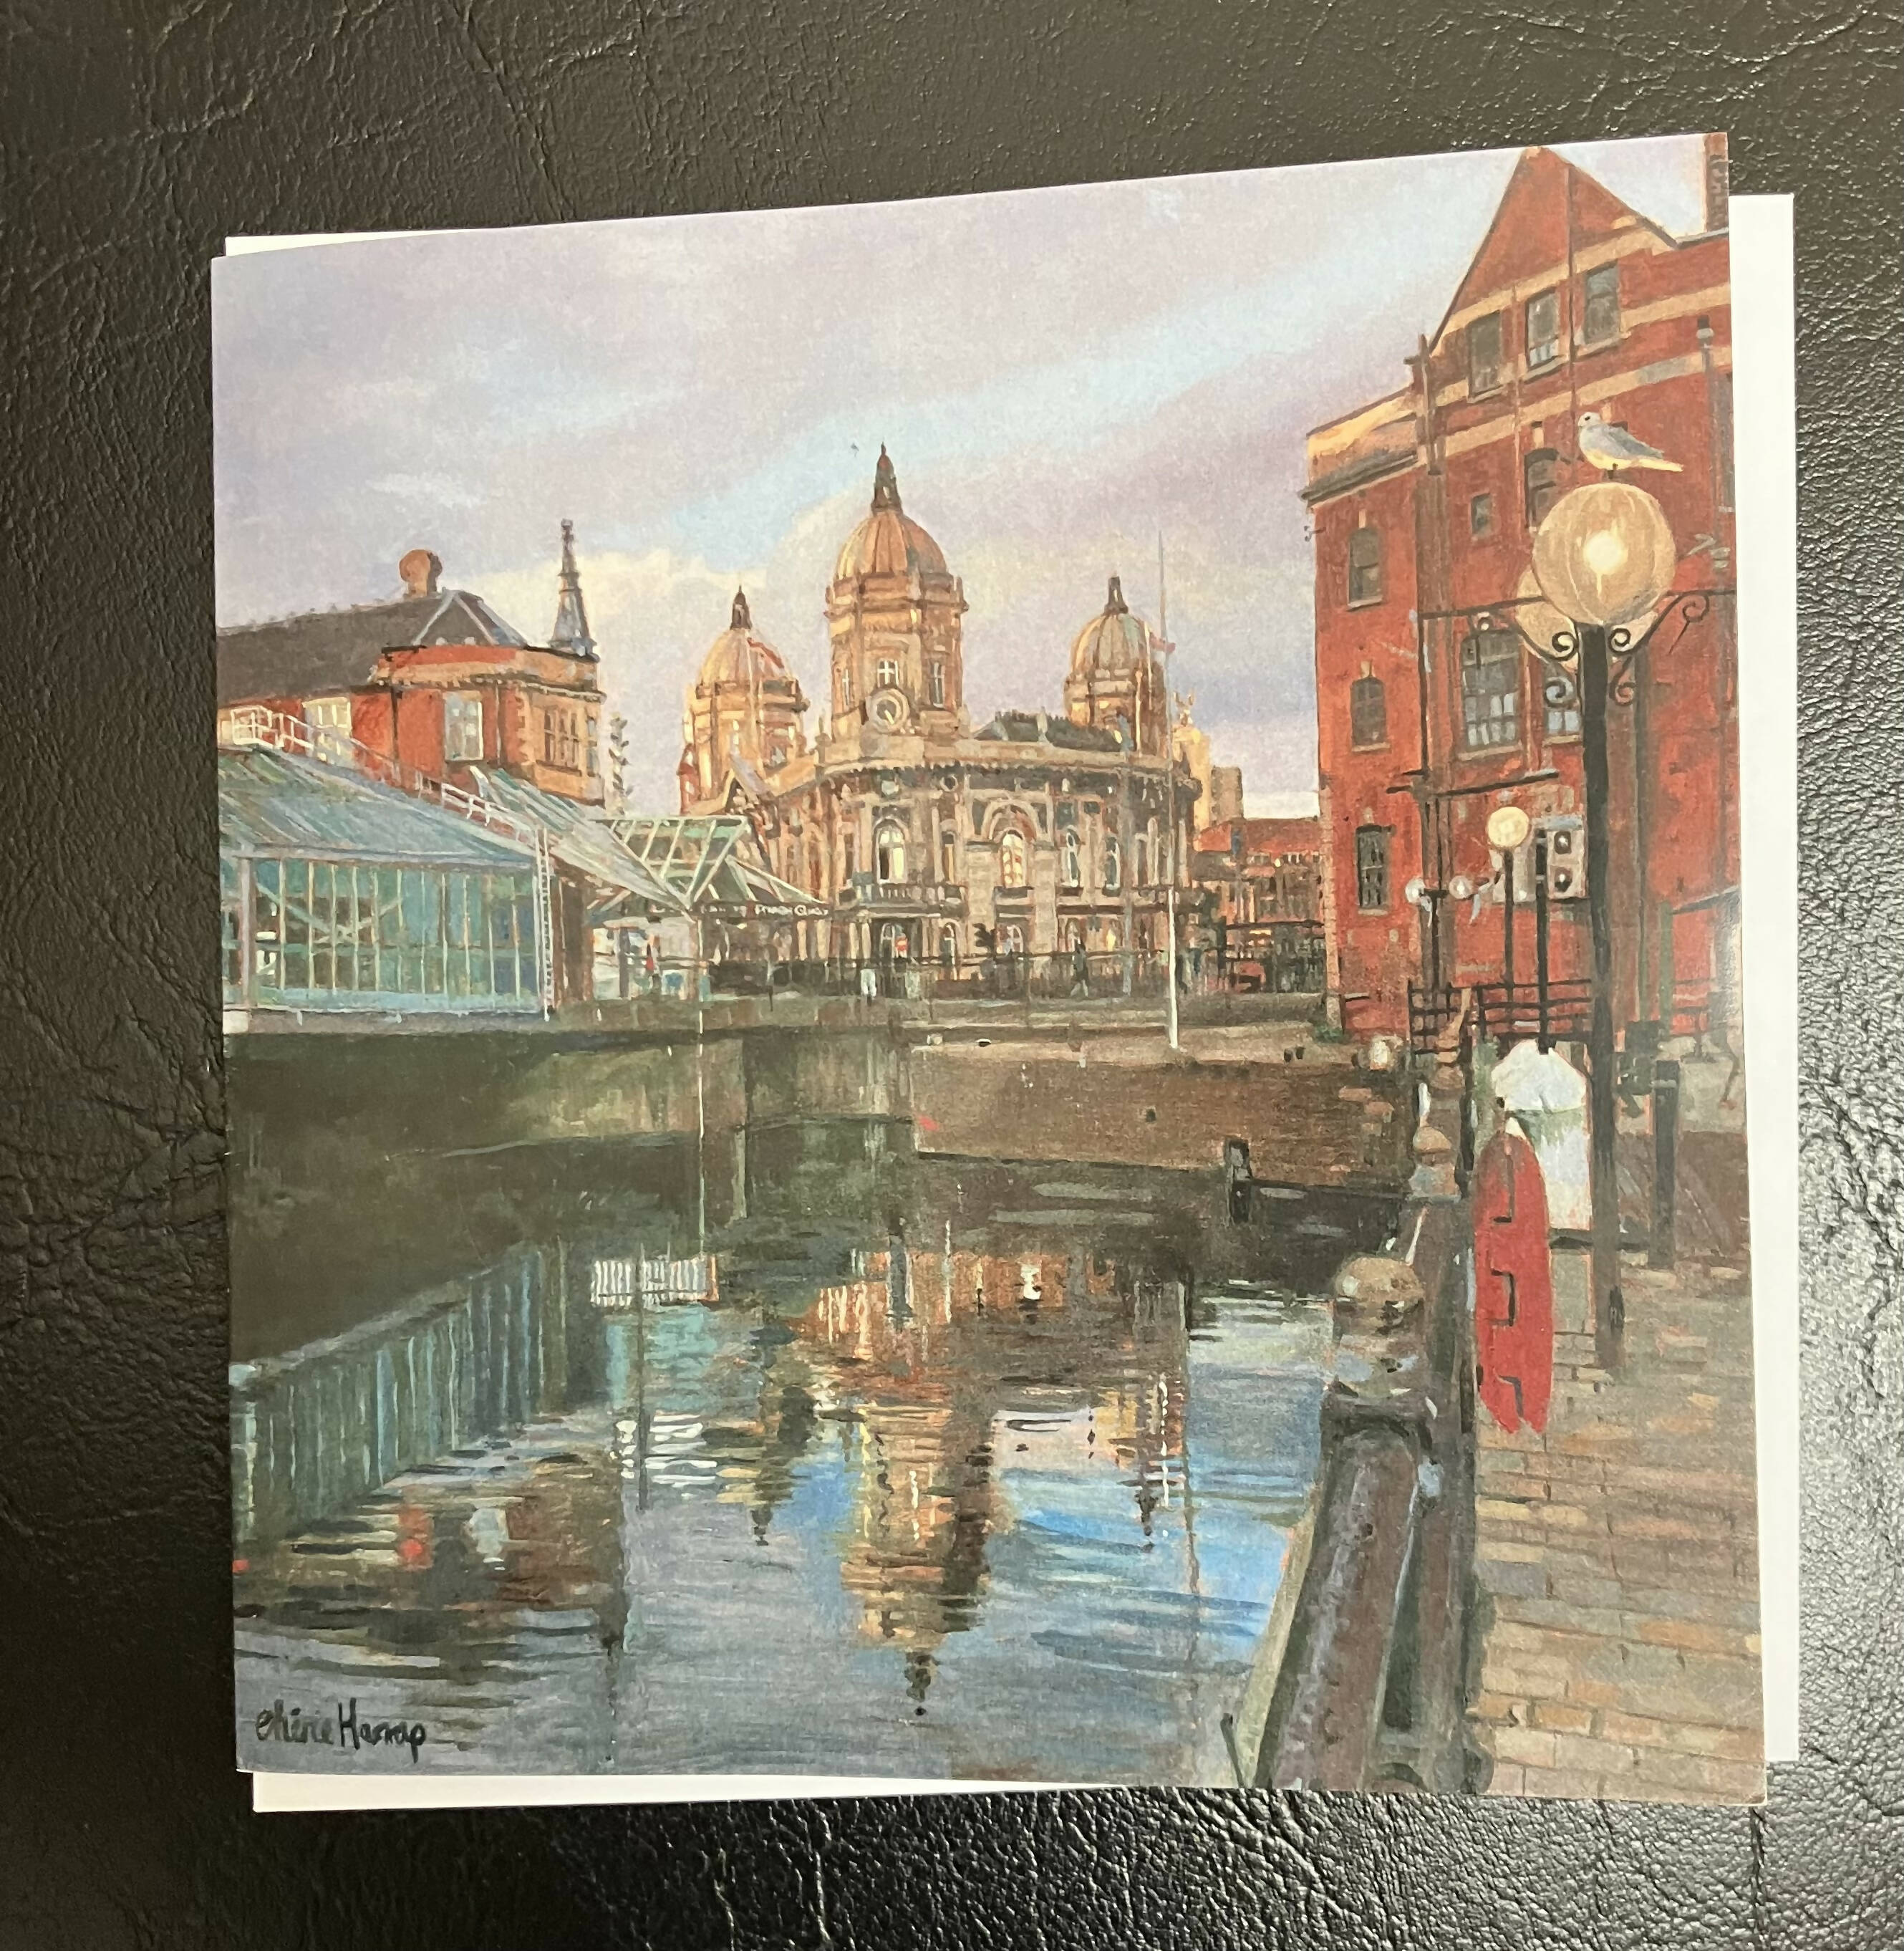 A Sunny Day at Princes Dock Greetings Card